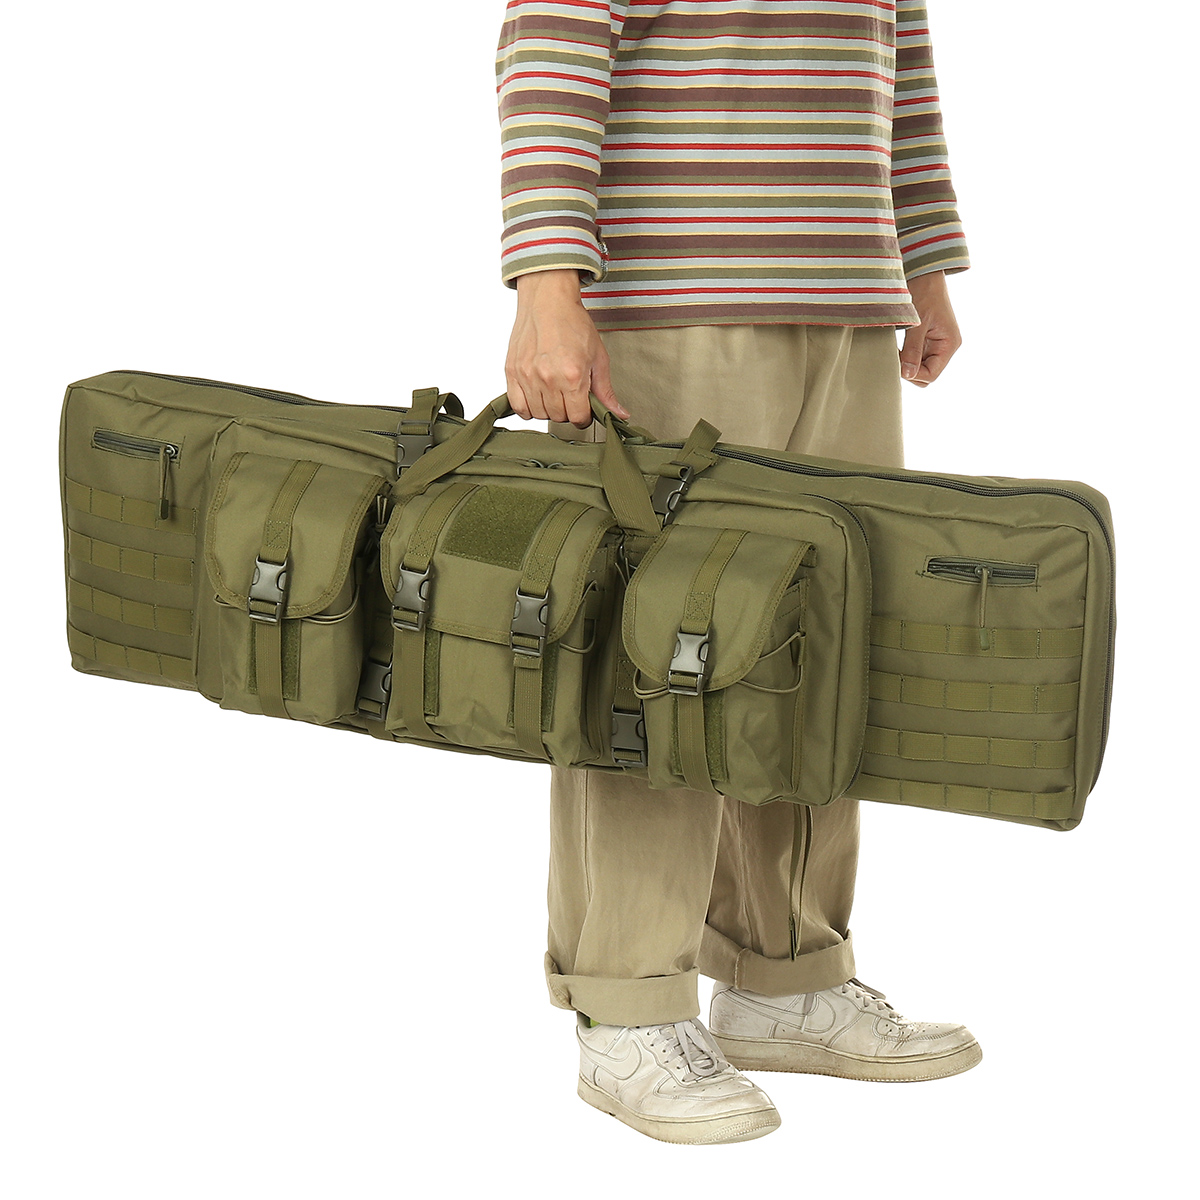 42-inch-Multifunctional-600D-Oxford-Cloth-Outdoor-Tactical-Storage-Bag-Double-Padded-Backpack-1854880-11